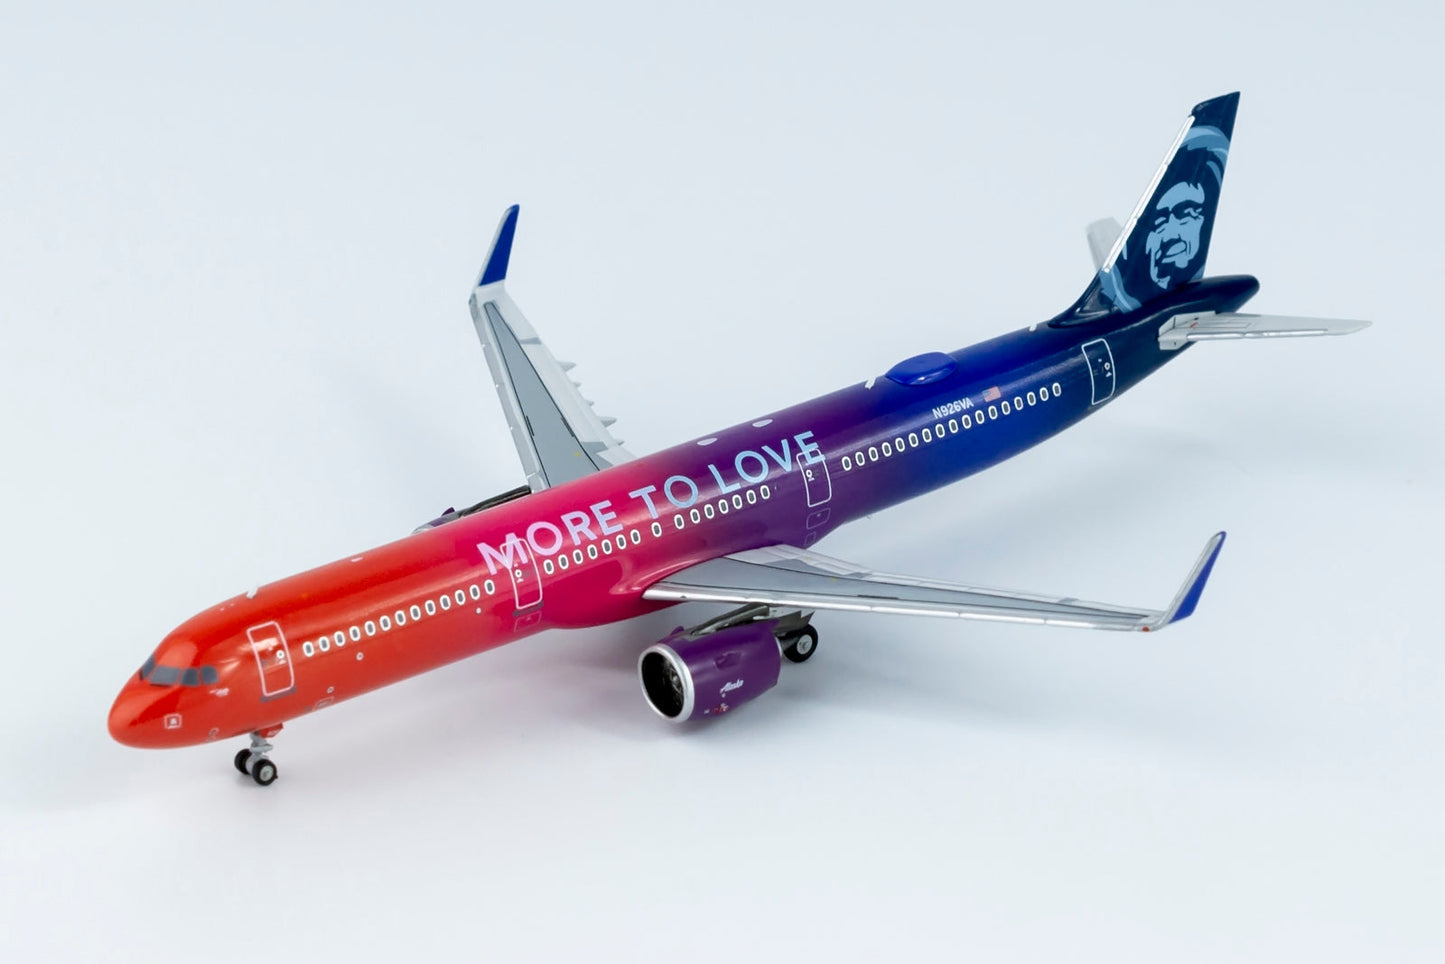 1/400 Alaska Airlines A321neo "More to Love" NG Models 13036s/d2 *Defective model*